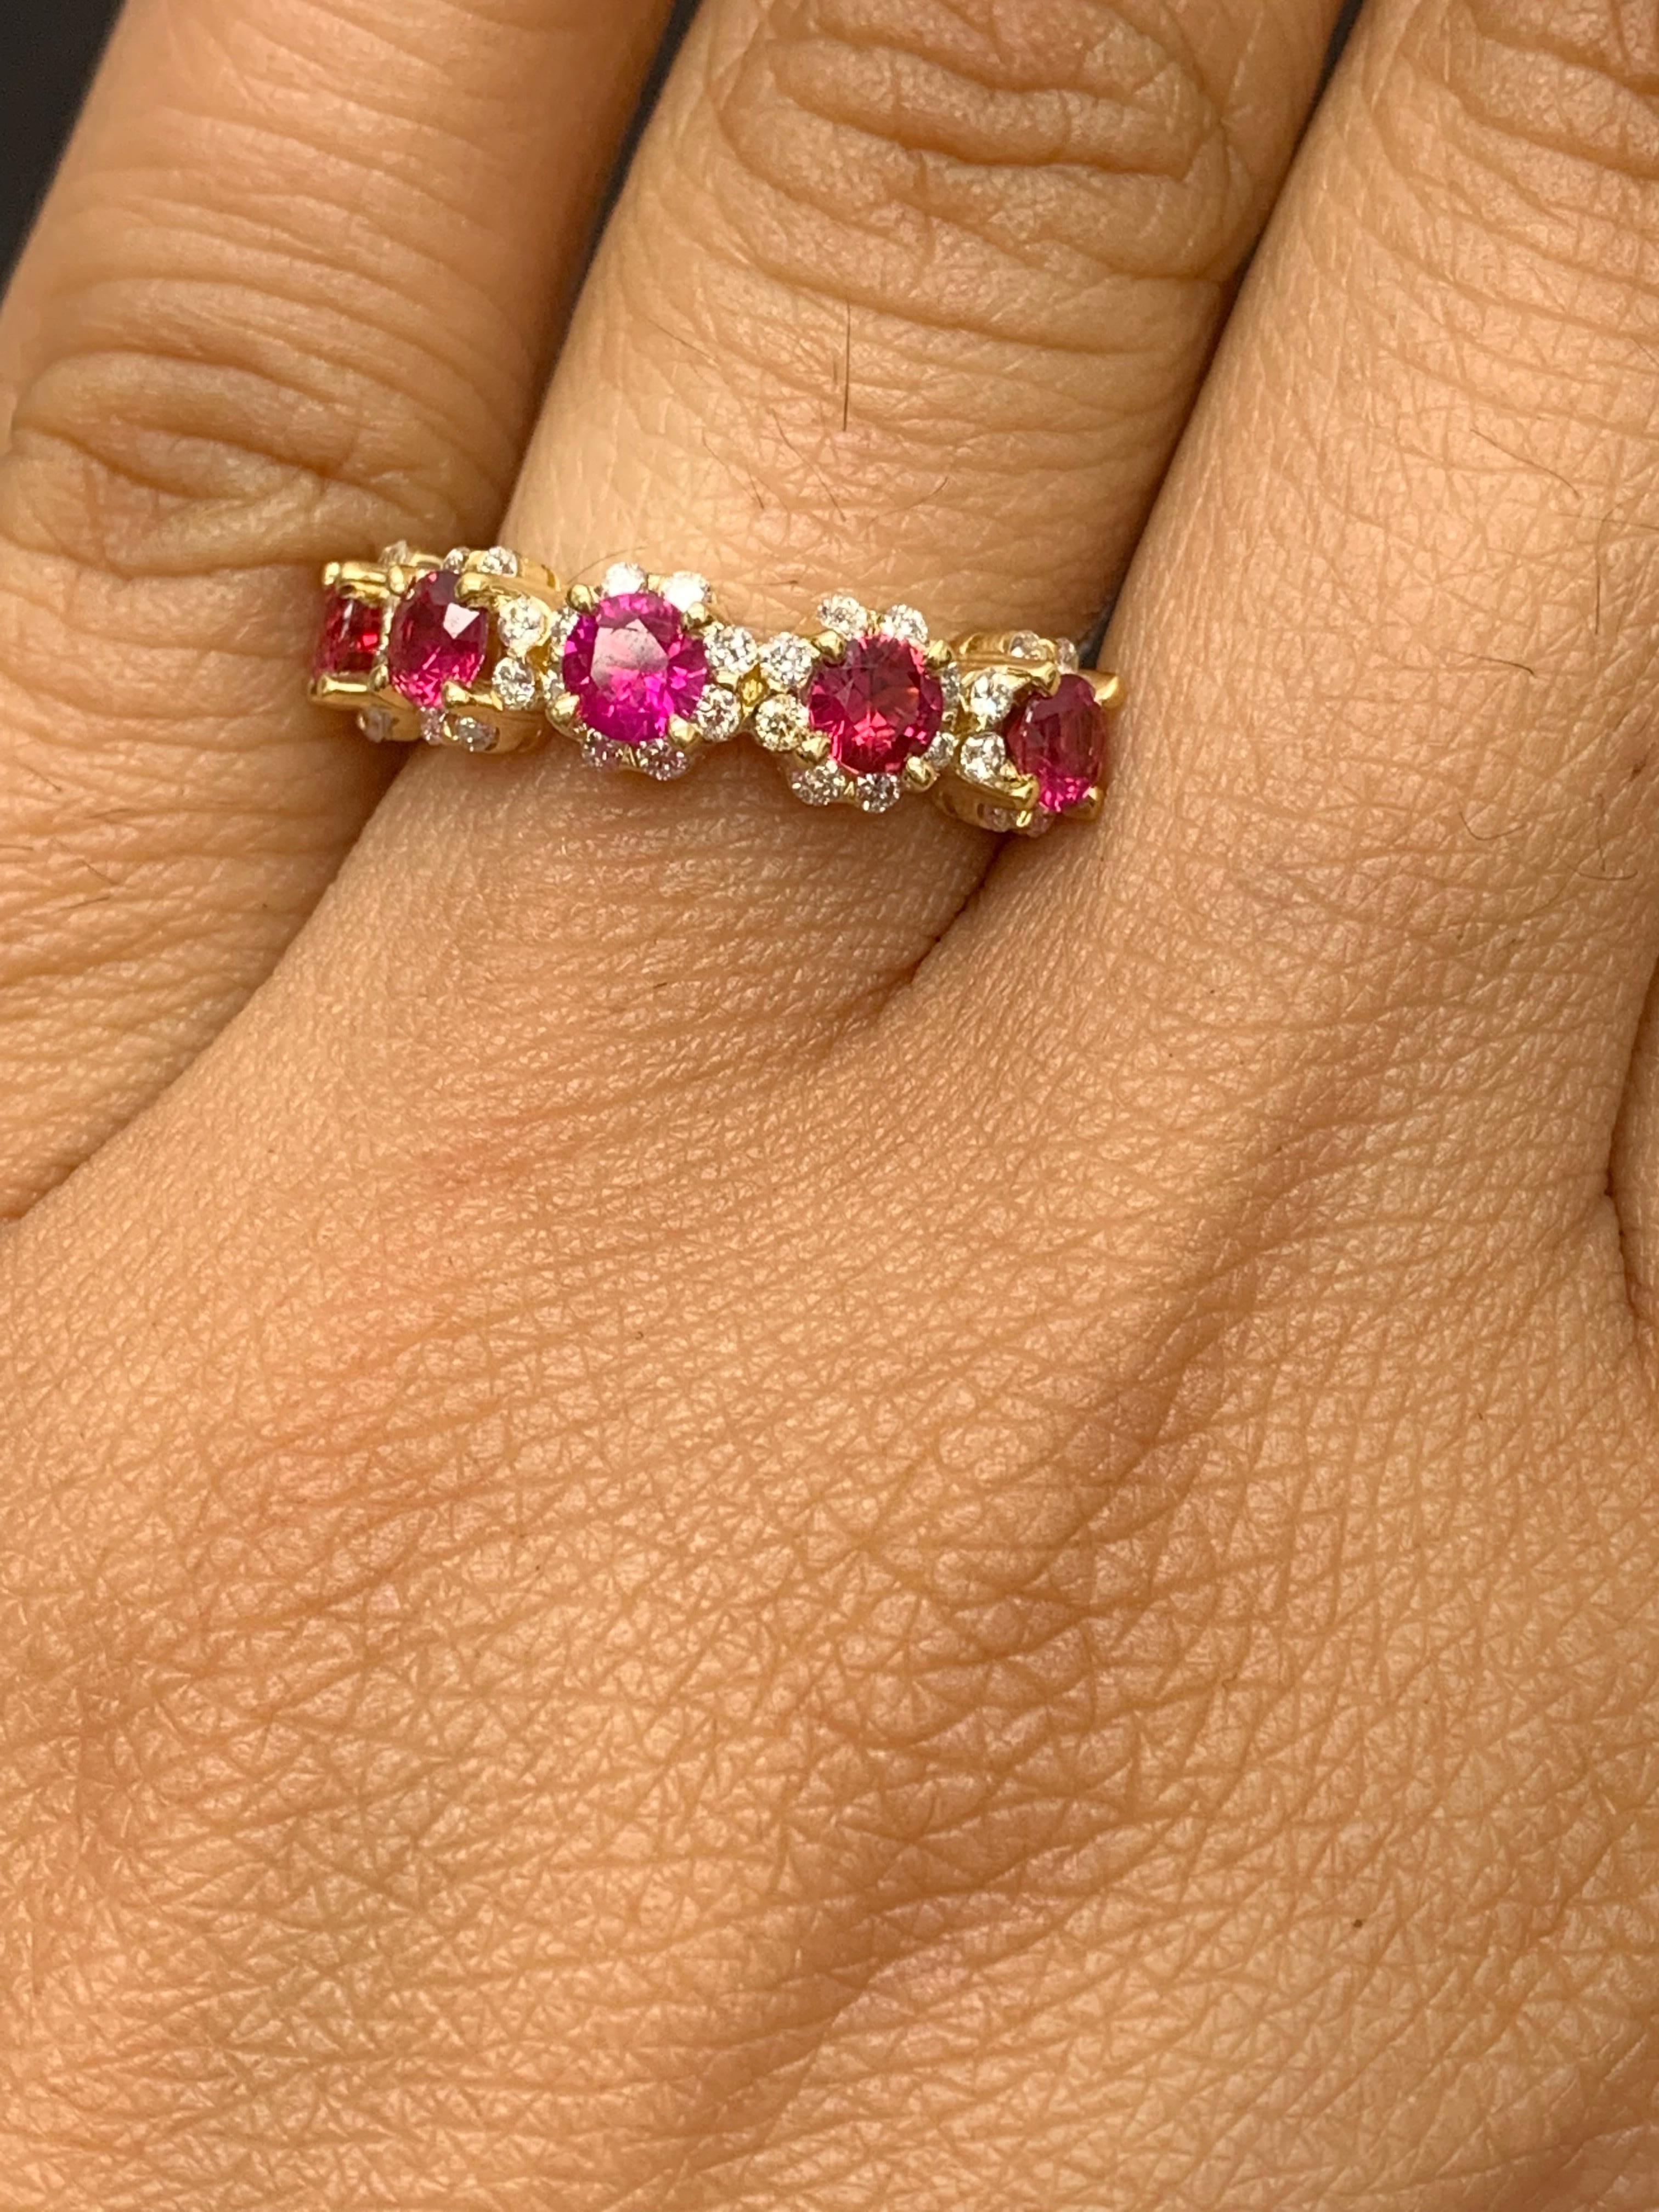 A fashionable and classic wedding band showcasing 5 color-rich red rubies weighing 1.25 carats total that are surrounded by brilliant round 40 diamonds weighing 0.44 carats total. Made in 18K yellow gold. A versatile piece that can be worn as a